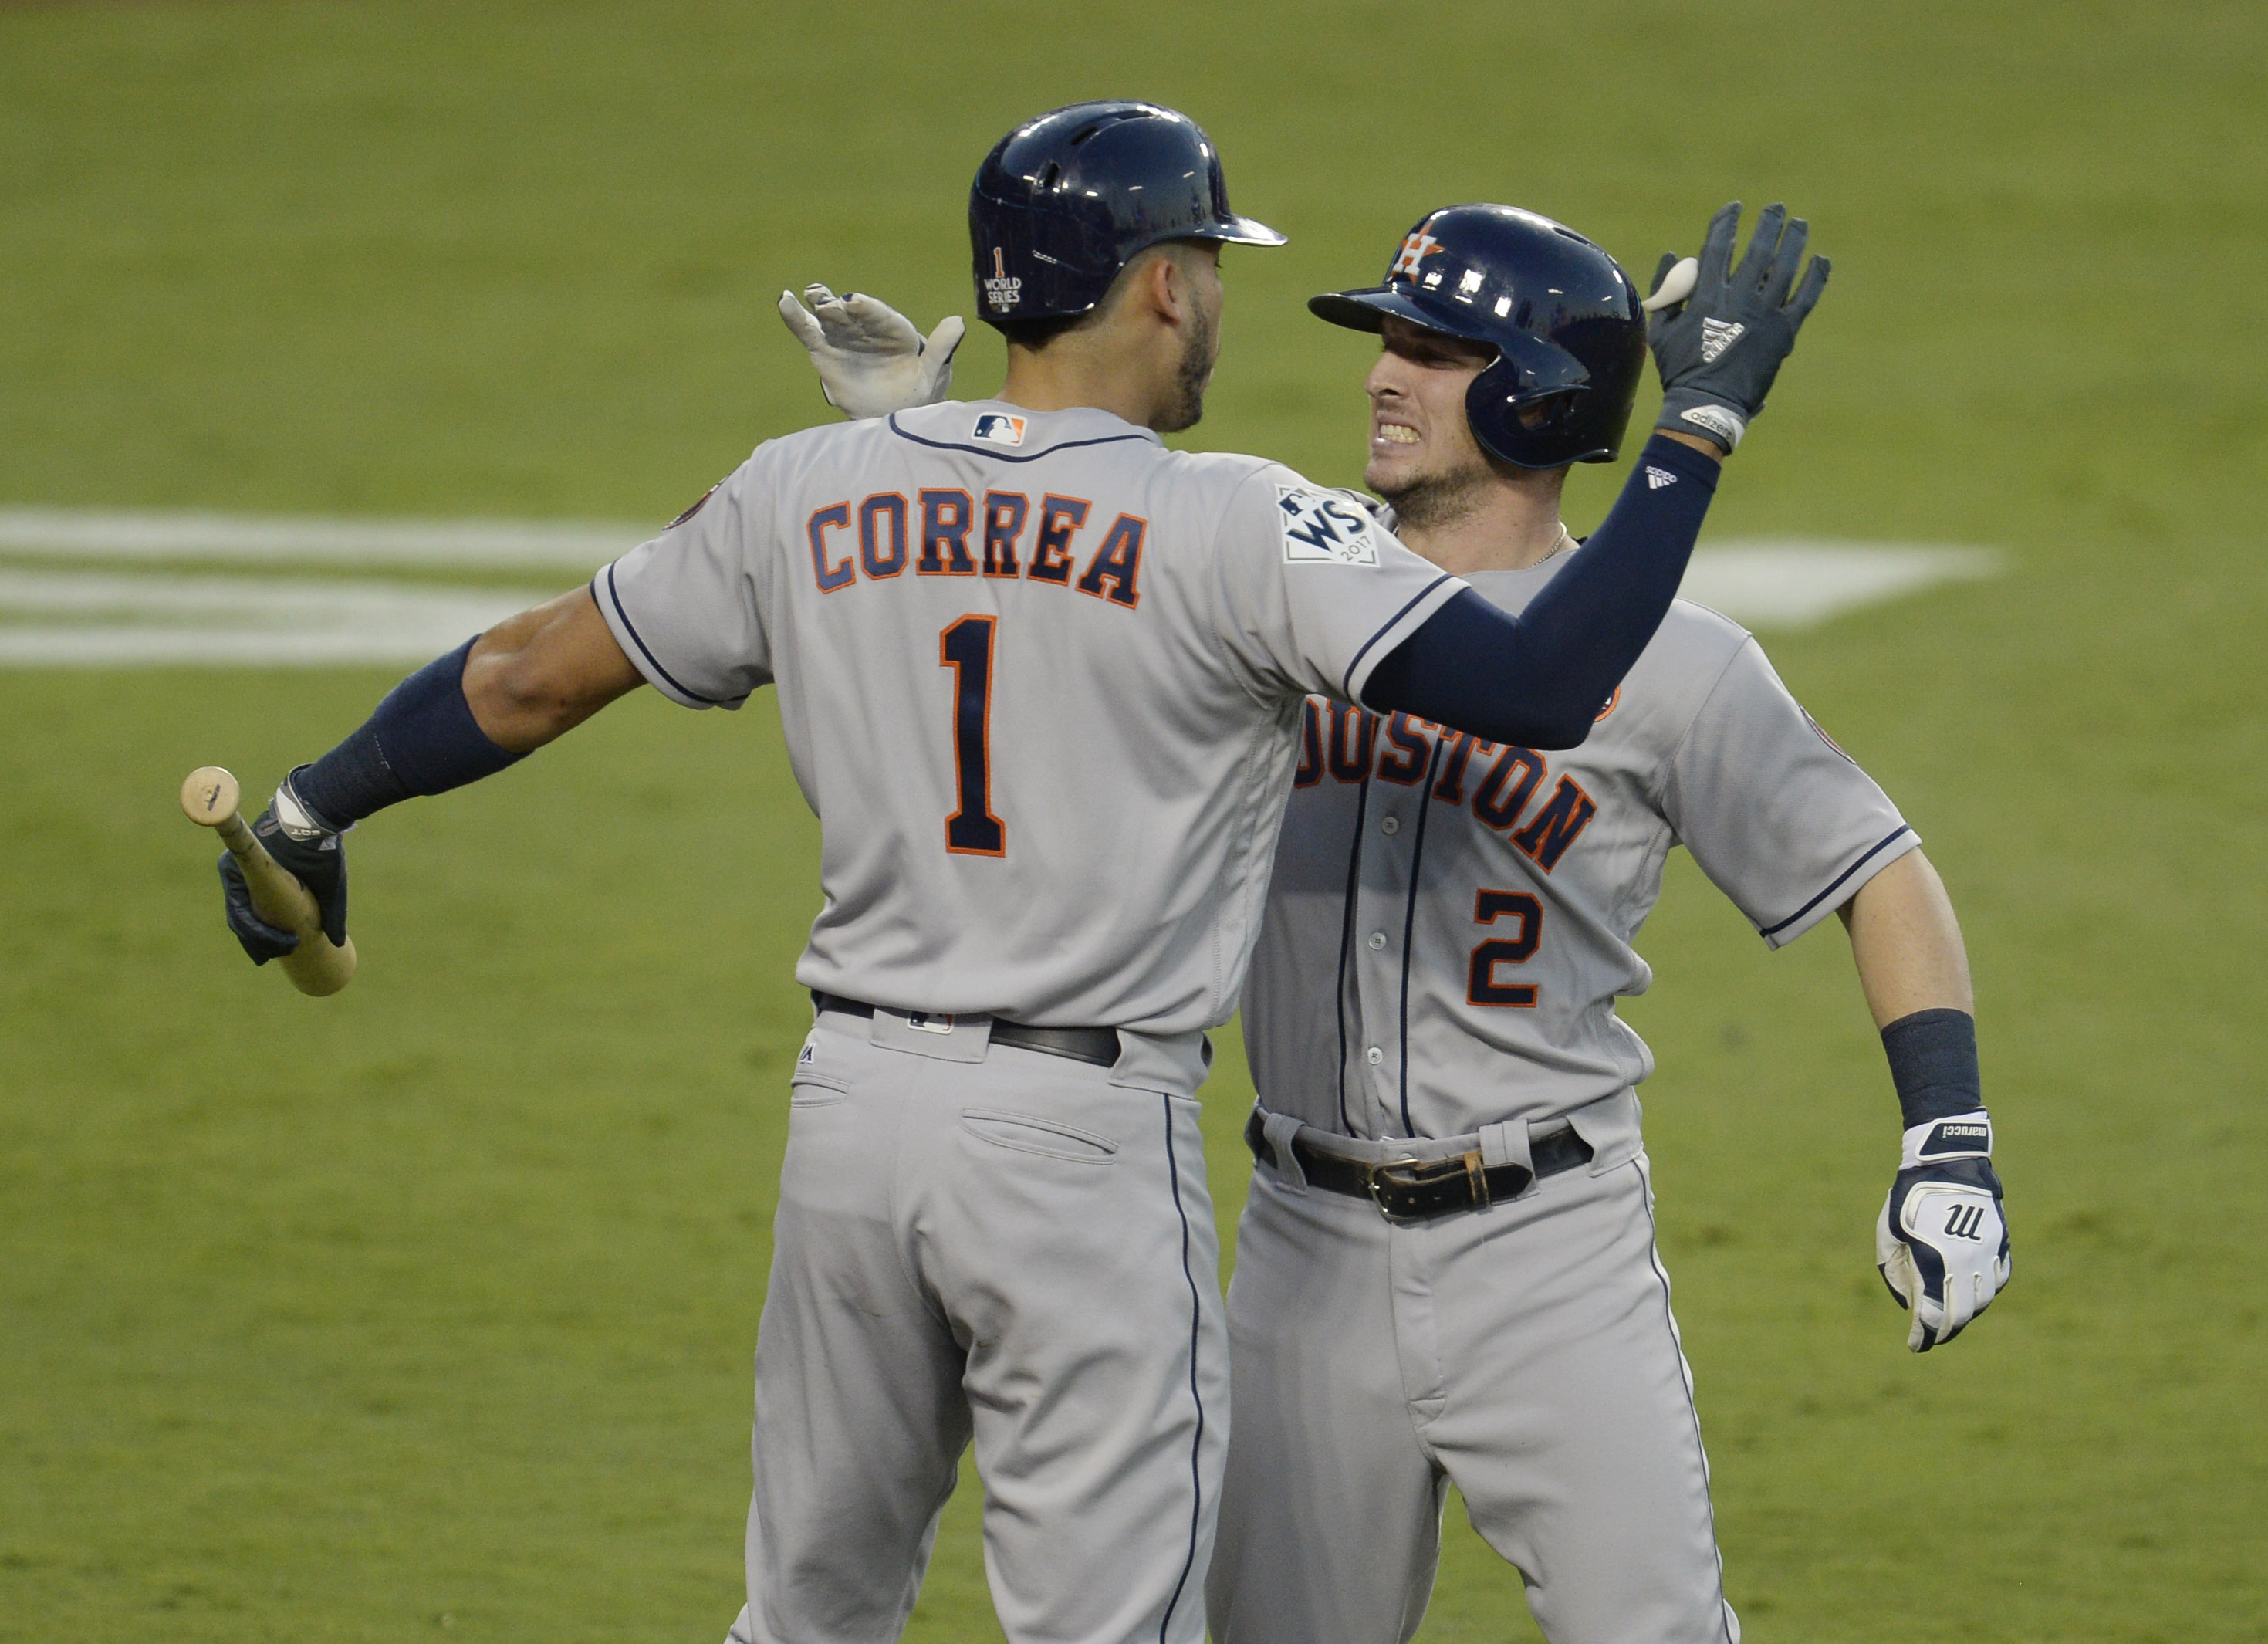 LIVE BLOG: Astros fall to Dodgers in Game 1